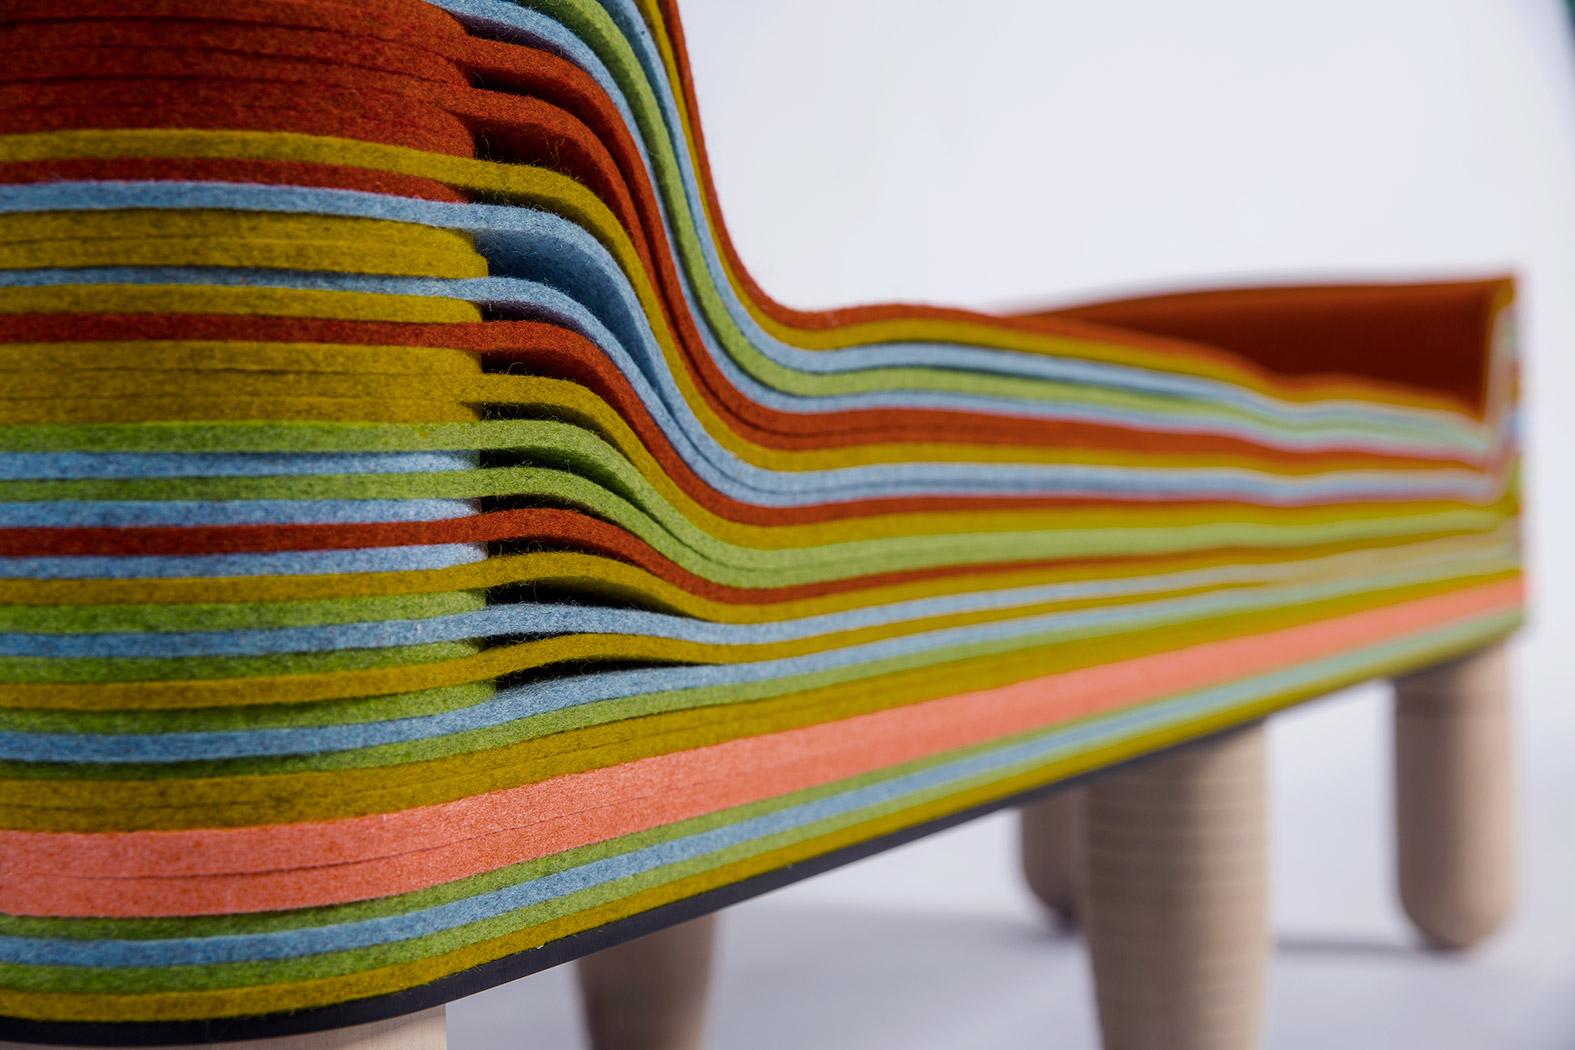 Maxine B, Felt and Wood Bench, Benoist F. Drut in STACKABL, Canada, 2021 For Sale 5